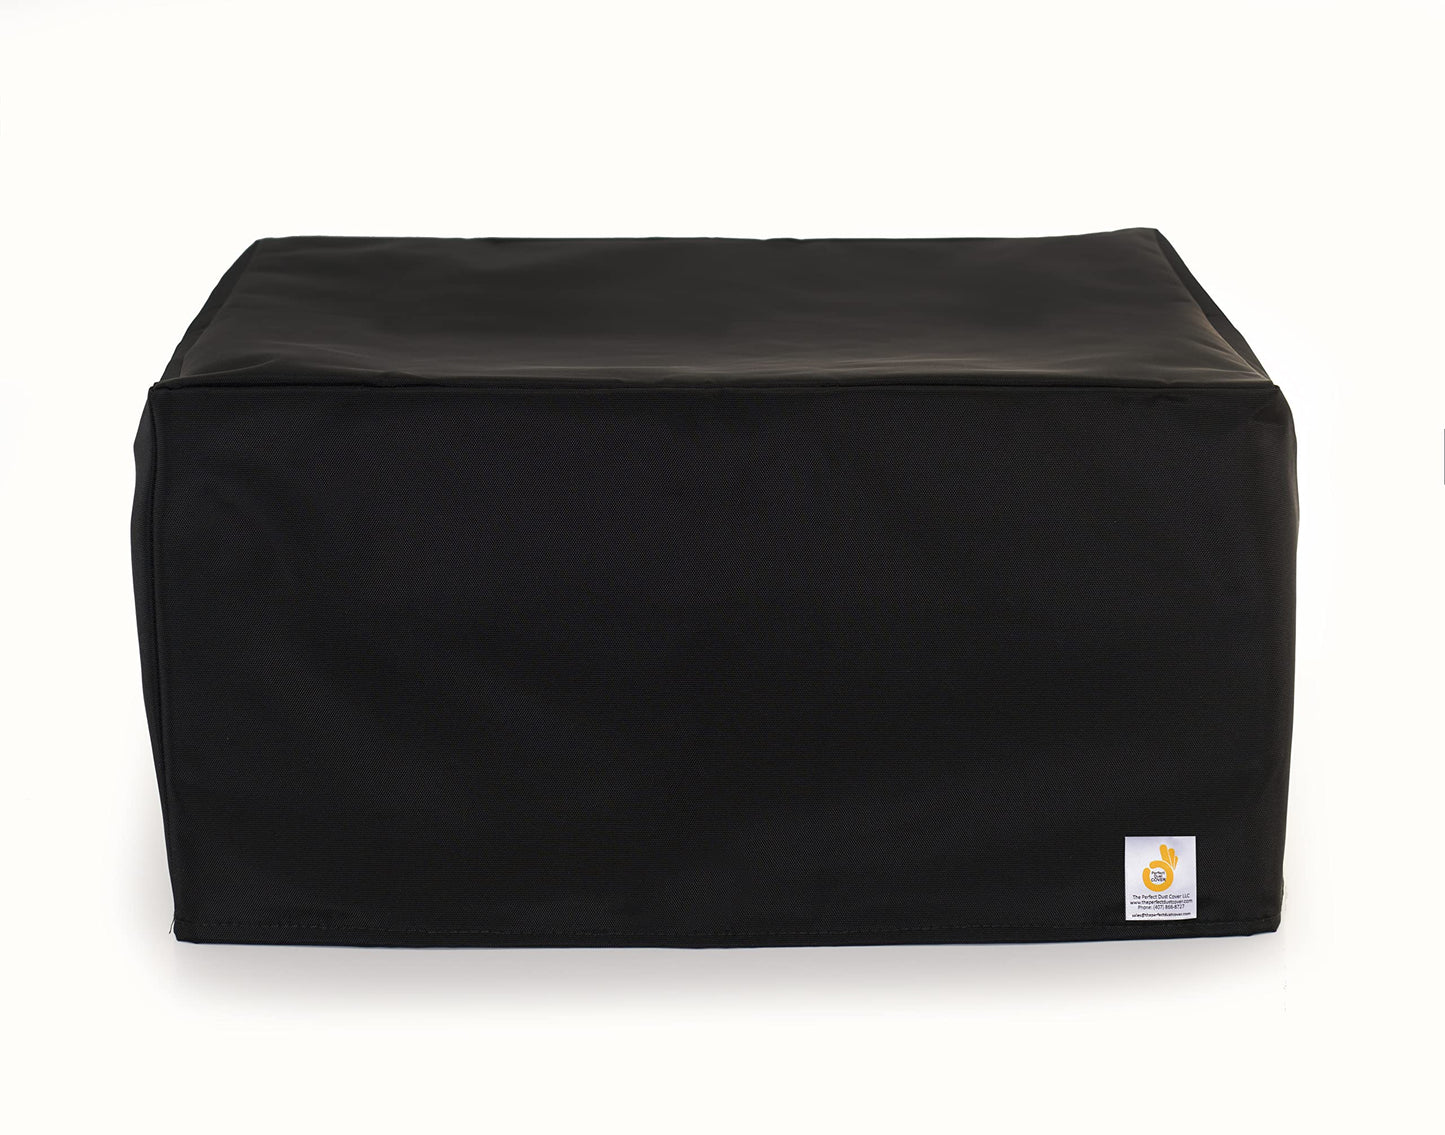 The Perfect Dust Cover, Anti Static Cover for Brother MFC-L3770CDW Color All-in-One Printer, Black Nylon and Waterproof Cover Dimensions 16.1''W x 20''D x 16.3''H by The Perfect Dust Cover LLC